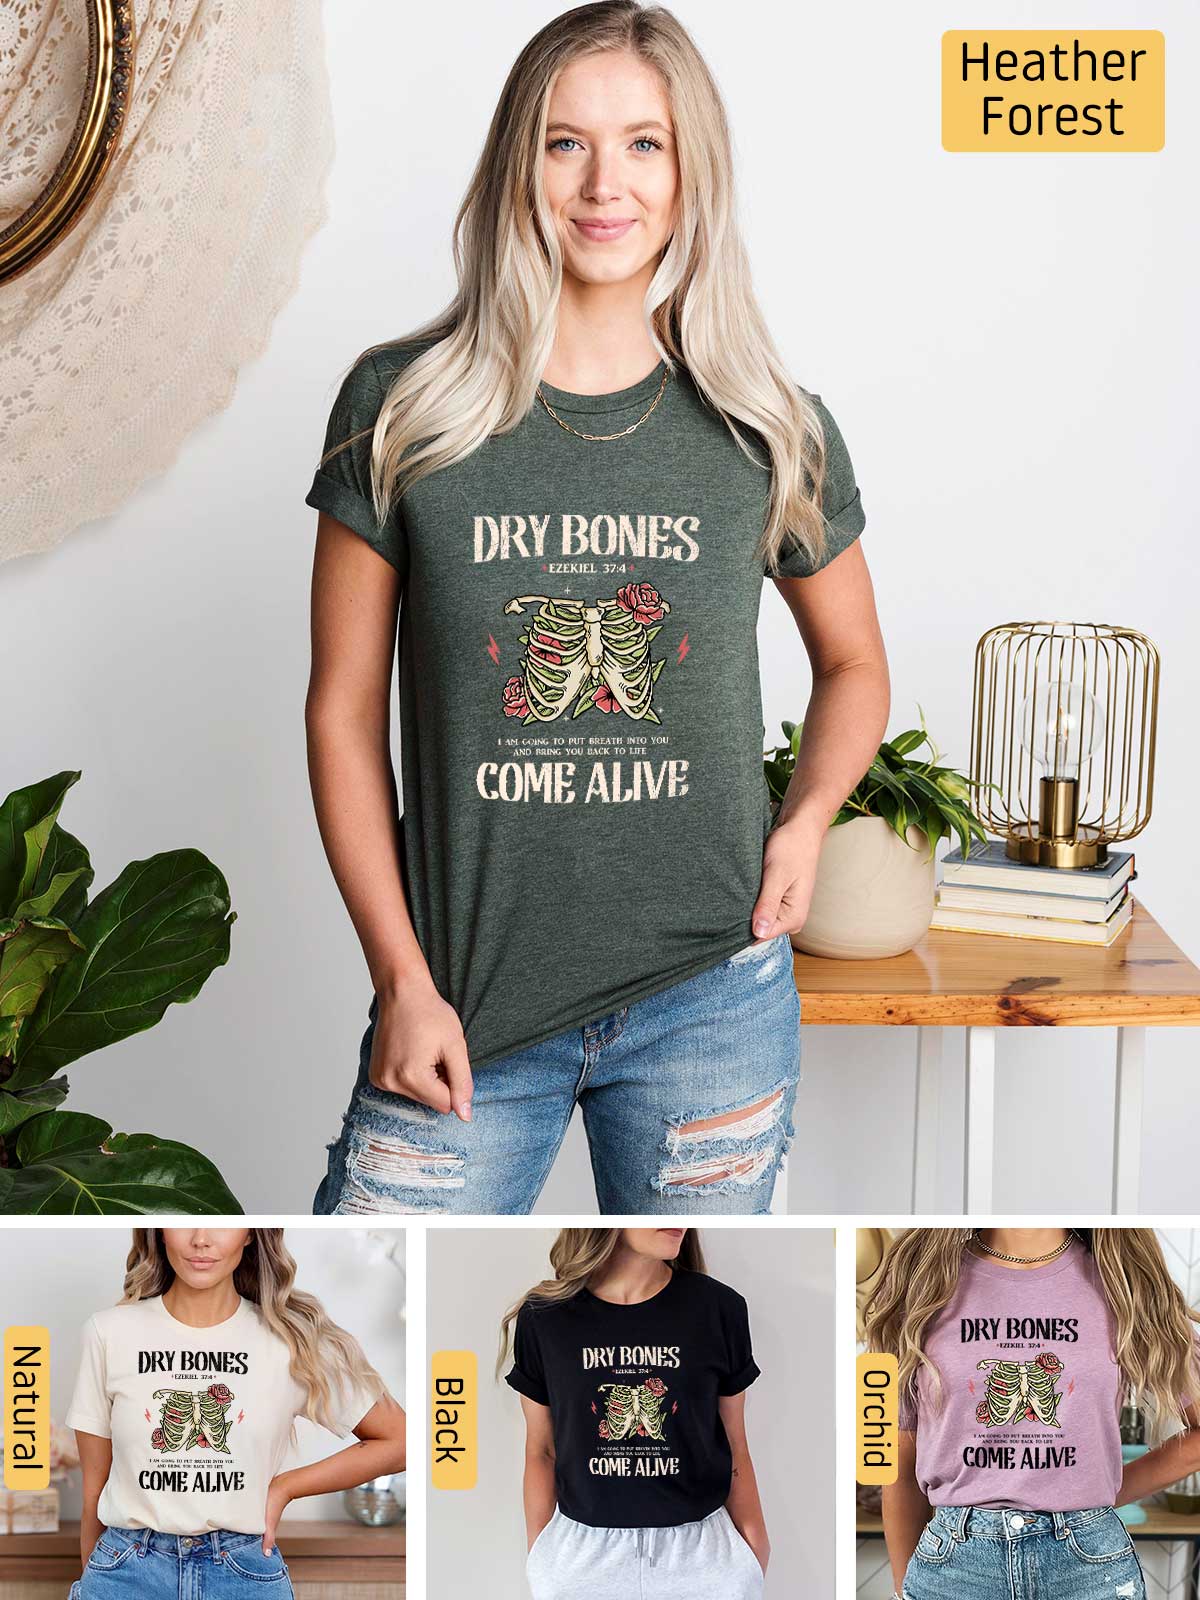 a collage of photos of a woman wearing a t - shirt that says dry